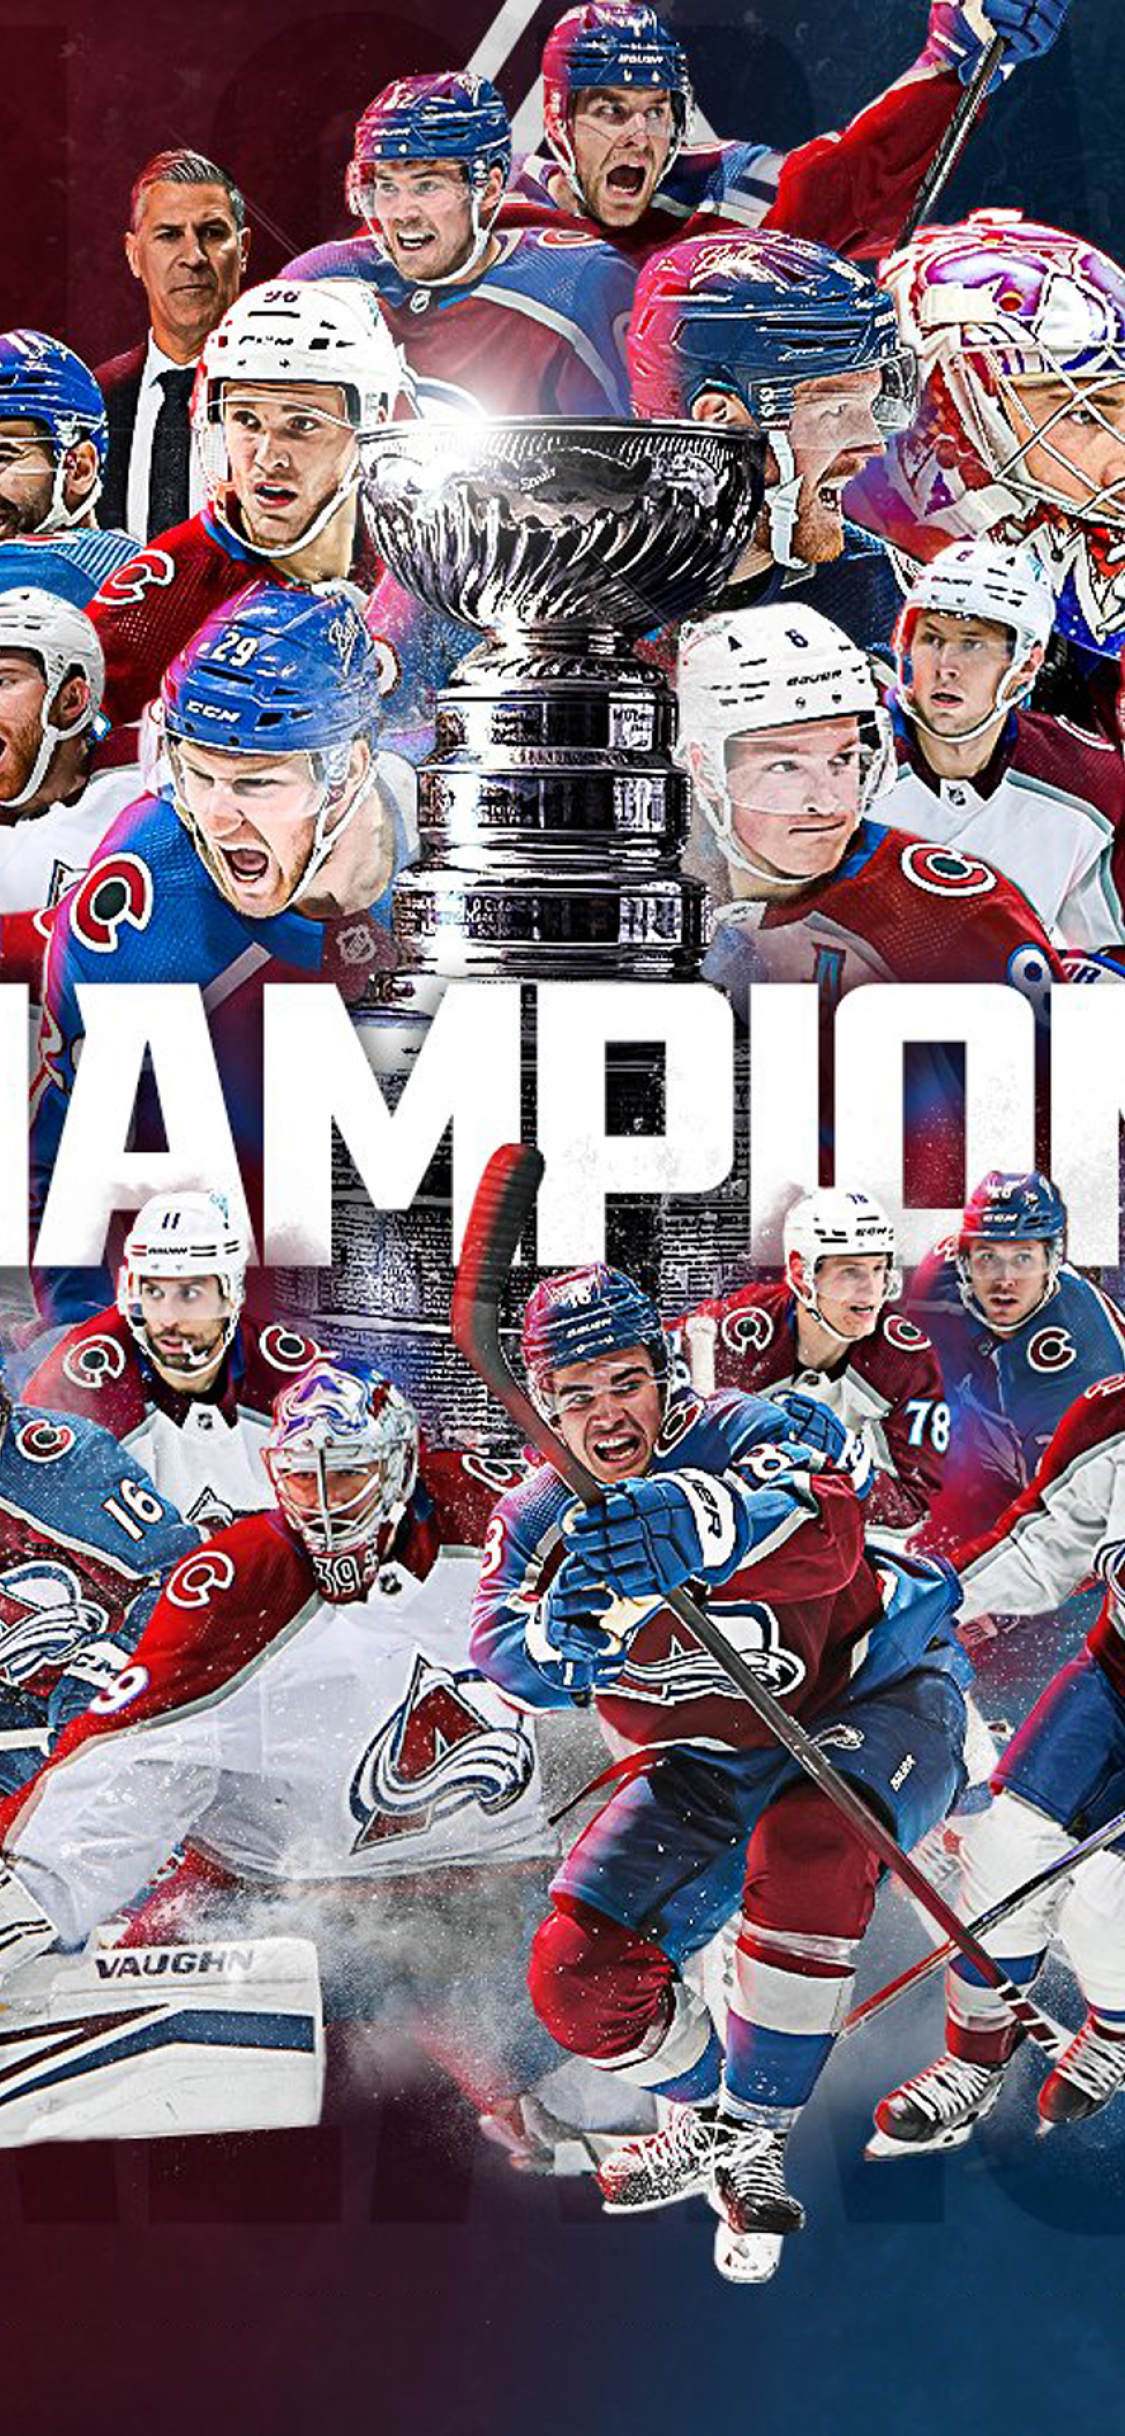 Download Colorado Avalanche Celebrating Stanley Cup Victory 2014 Wallpaper   Wallpaperscom